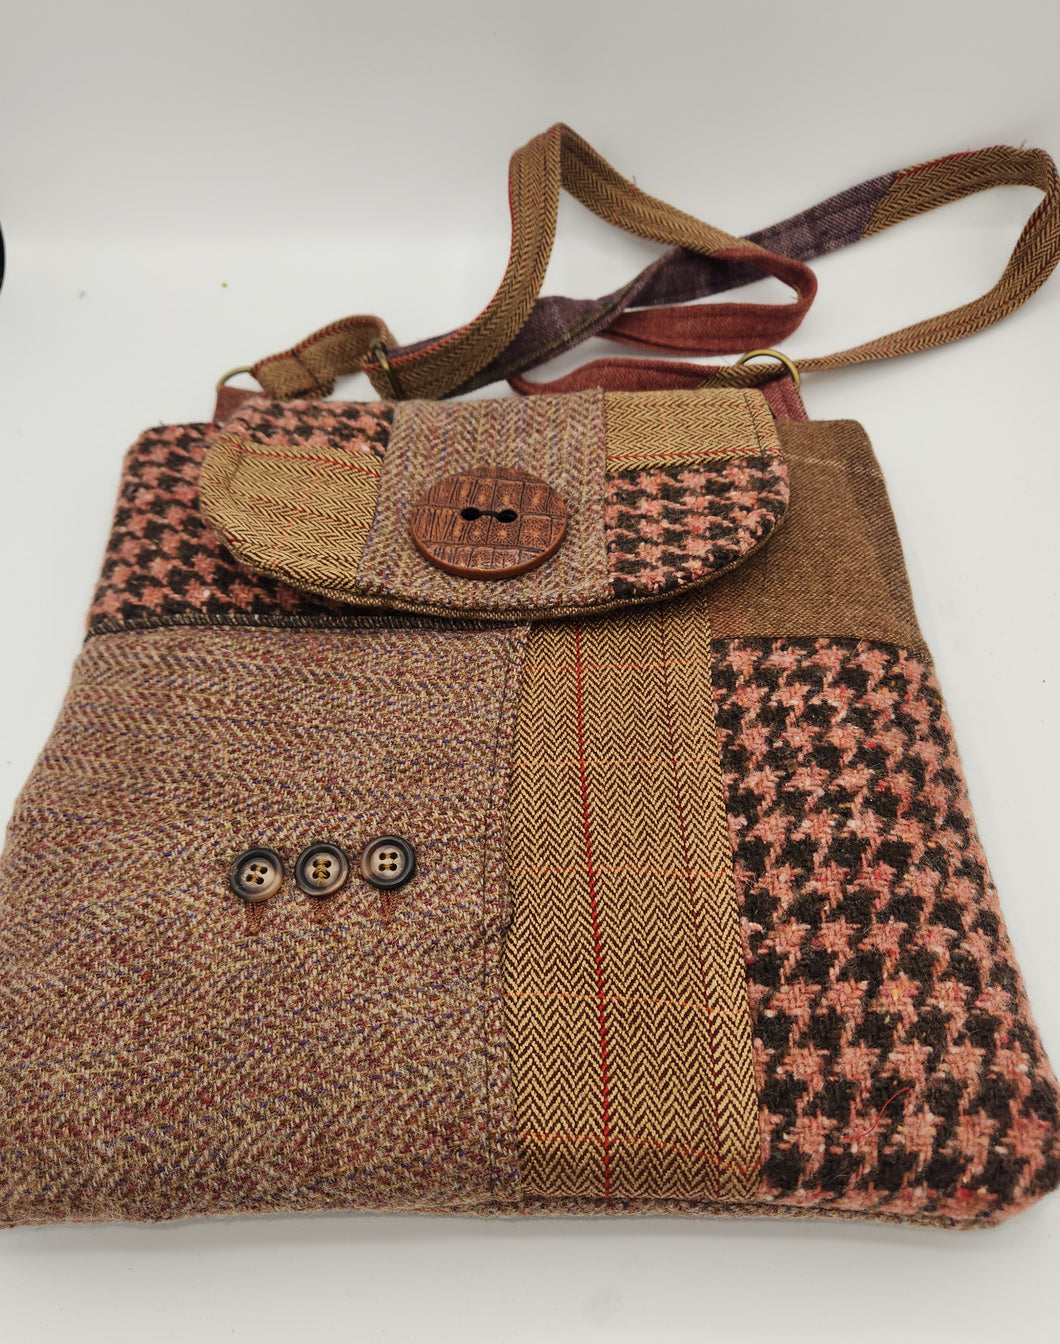 upcycled purse, men's suitcoat purse, handmade bag, crossbody bag, recycled fabric bag